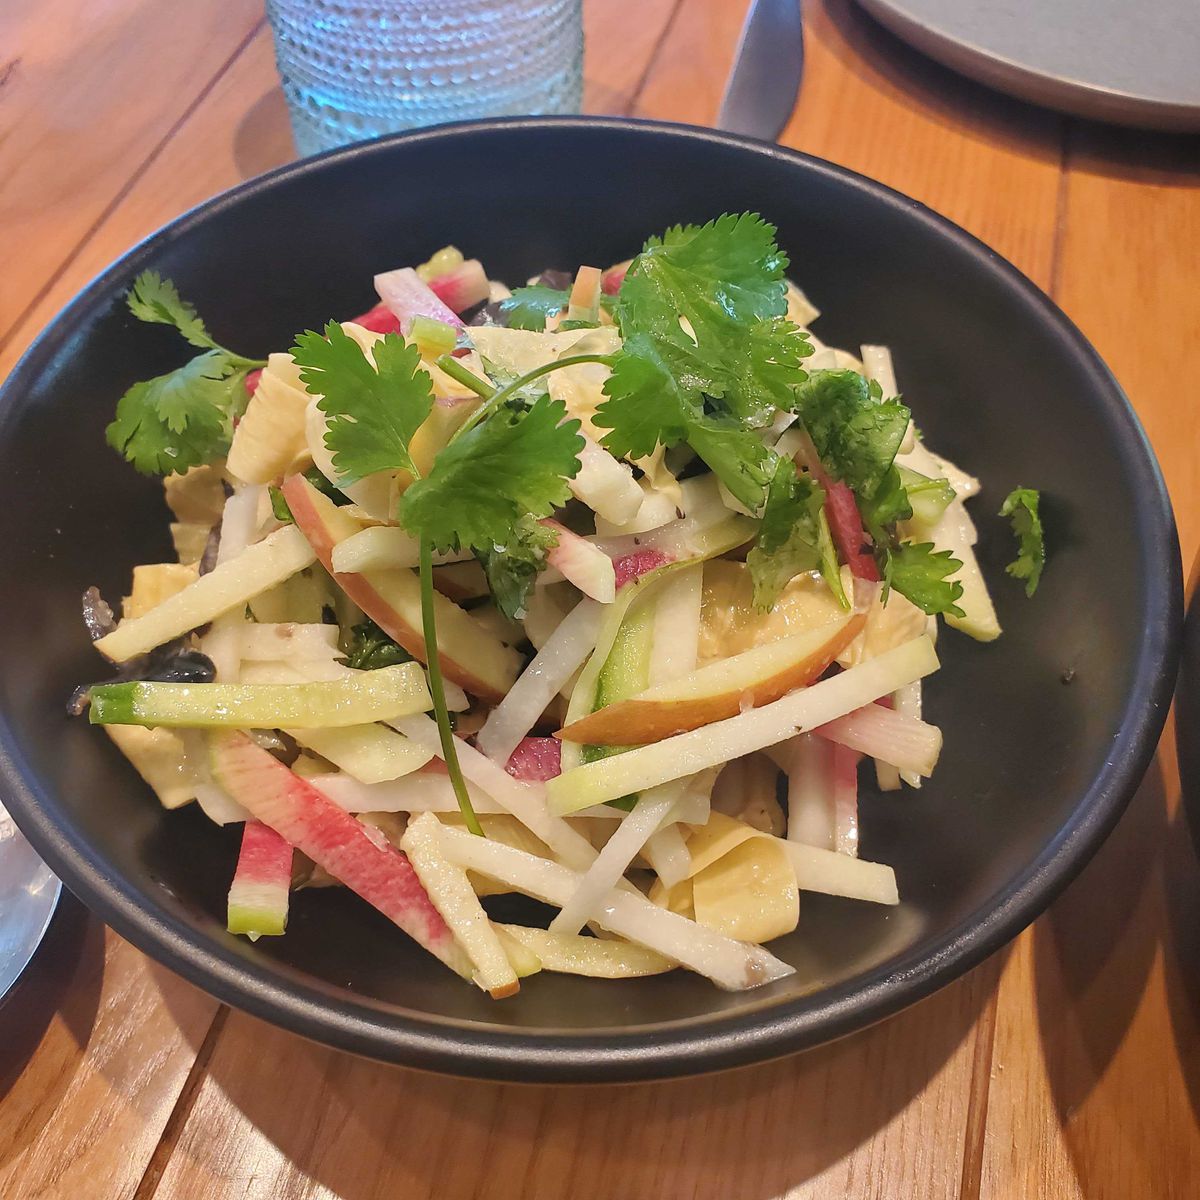 A bowl of yuba salad, with matchstick-sized pieces of cucumber, kohlrabi, apple, and sprigs of cilantro